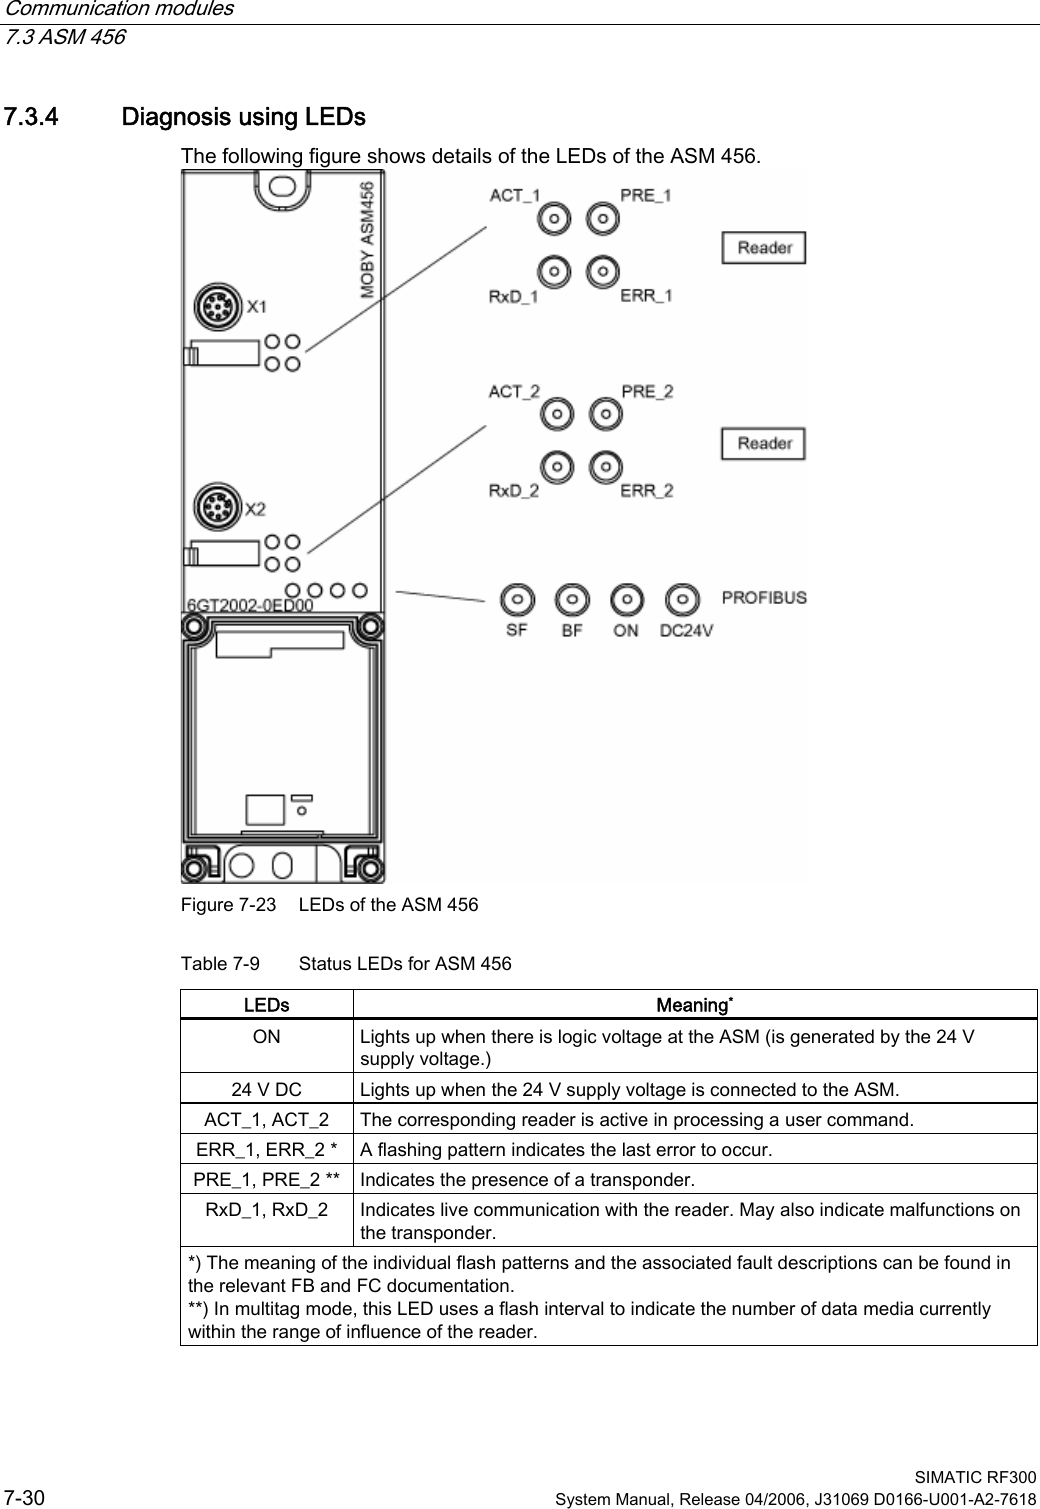 Communication modules 7.3 ASM 456  SIMATIC RF300 7-30  System Manual, Release 04/2006, J31069 D0166-U001-A2-7618 7.3.4  Diagnosis using LEDs The following figure shows details of the LEDs of the ASM 456.  Figure 7-23  LEDs of the ASM 456 Table 7-9  Status LEDs for ASM 456 LEDs  Meaning* ON  Lights up when there is logic voltage at the ASM (is generated by the 24 V supply voltage.)  24 V DC  Lights up when the 24 V supply voltage is connected to the ASM. ACT_1, ACT_2  The corresponding reader is active in processing a user command. ERR_1, ERR_2 *  A flashing pattern indicates the last error to occur. PRE_1, PRE_2 **  Indicates the presence of a transponder. RxD_1, RxD_2  Indicates live communication with the reader. May also indicate malfunctions on the transponder. *) The meaning of the individual flash patterns and the associated fault descriptions can be found in the relevant FB and FC documentation. **) In multitag mode, this LED uses a flash interval to indicate the number of data media currently within the range of influence of the reader. 